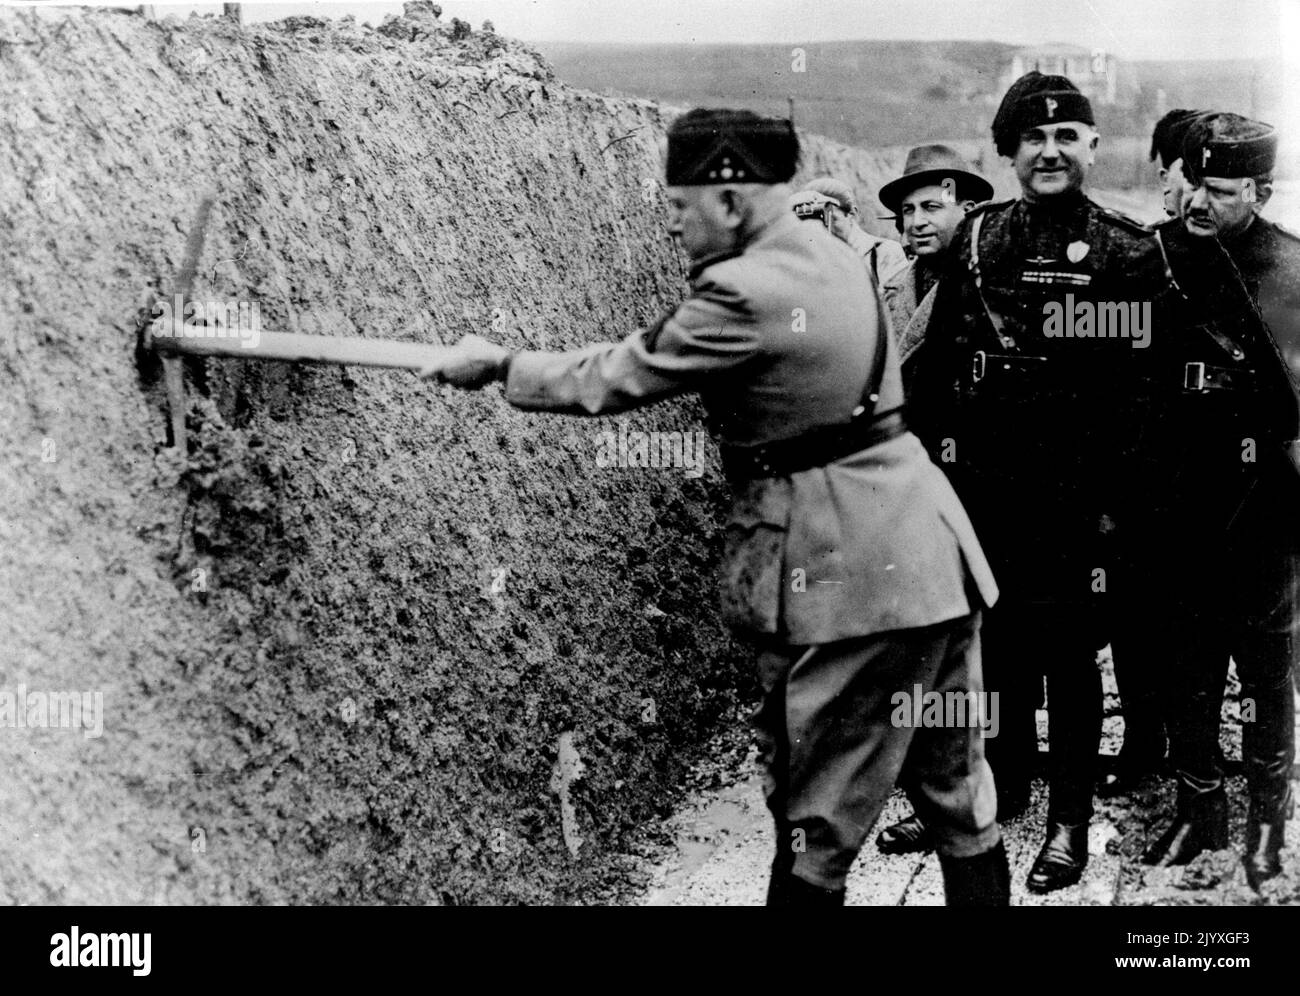 Mussolini Excavates With A Pick-Axe Starts Work On New Aerodrome - Signor Mussolini inaugurating the excavation work with a pick-axe. Signor Mussolini inaugurated with a pick-axe the work of construction a big new aerodrome at Magliana Vecchia, near the site chosen for the Rome Universal Exposition of 1941. March 27, 1937. Stock Photo